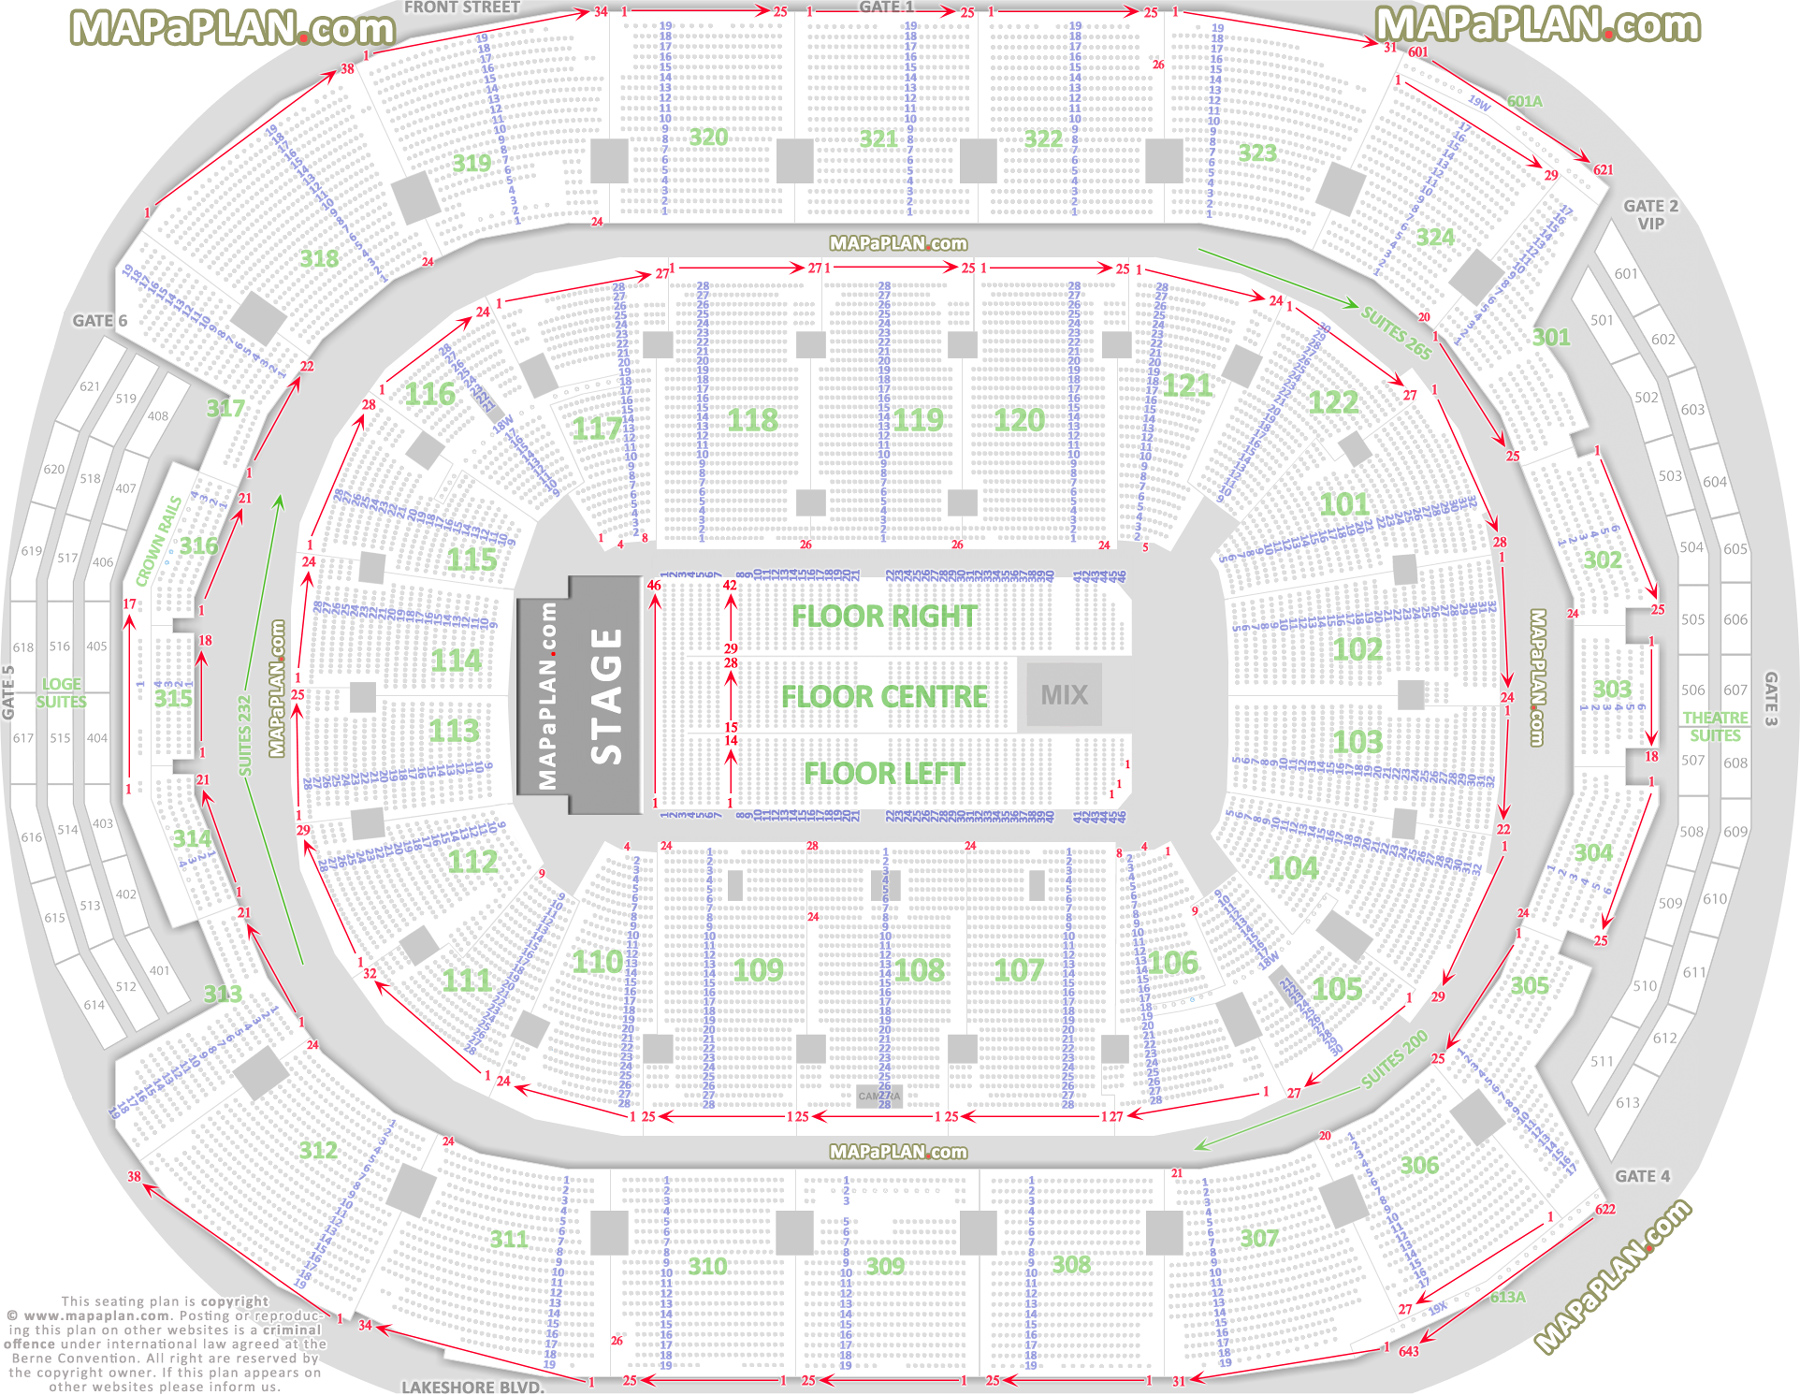 Detailed seat row numbers chart with west end stage concert floor plan layout Toronto Air Canada Centre seating chart